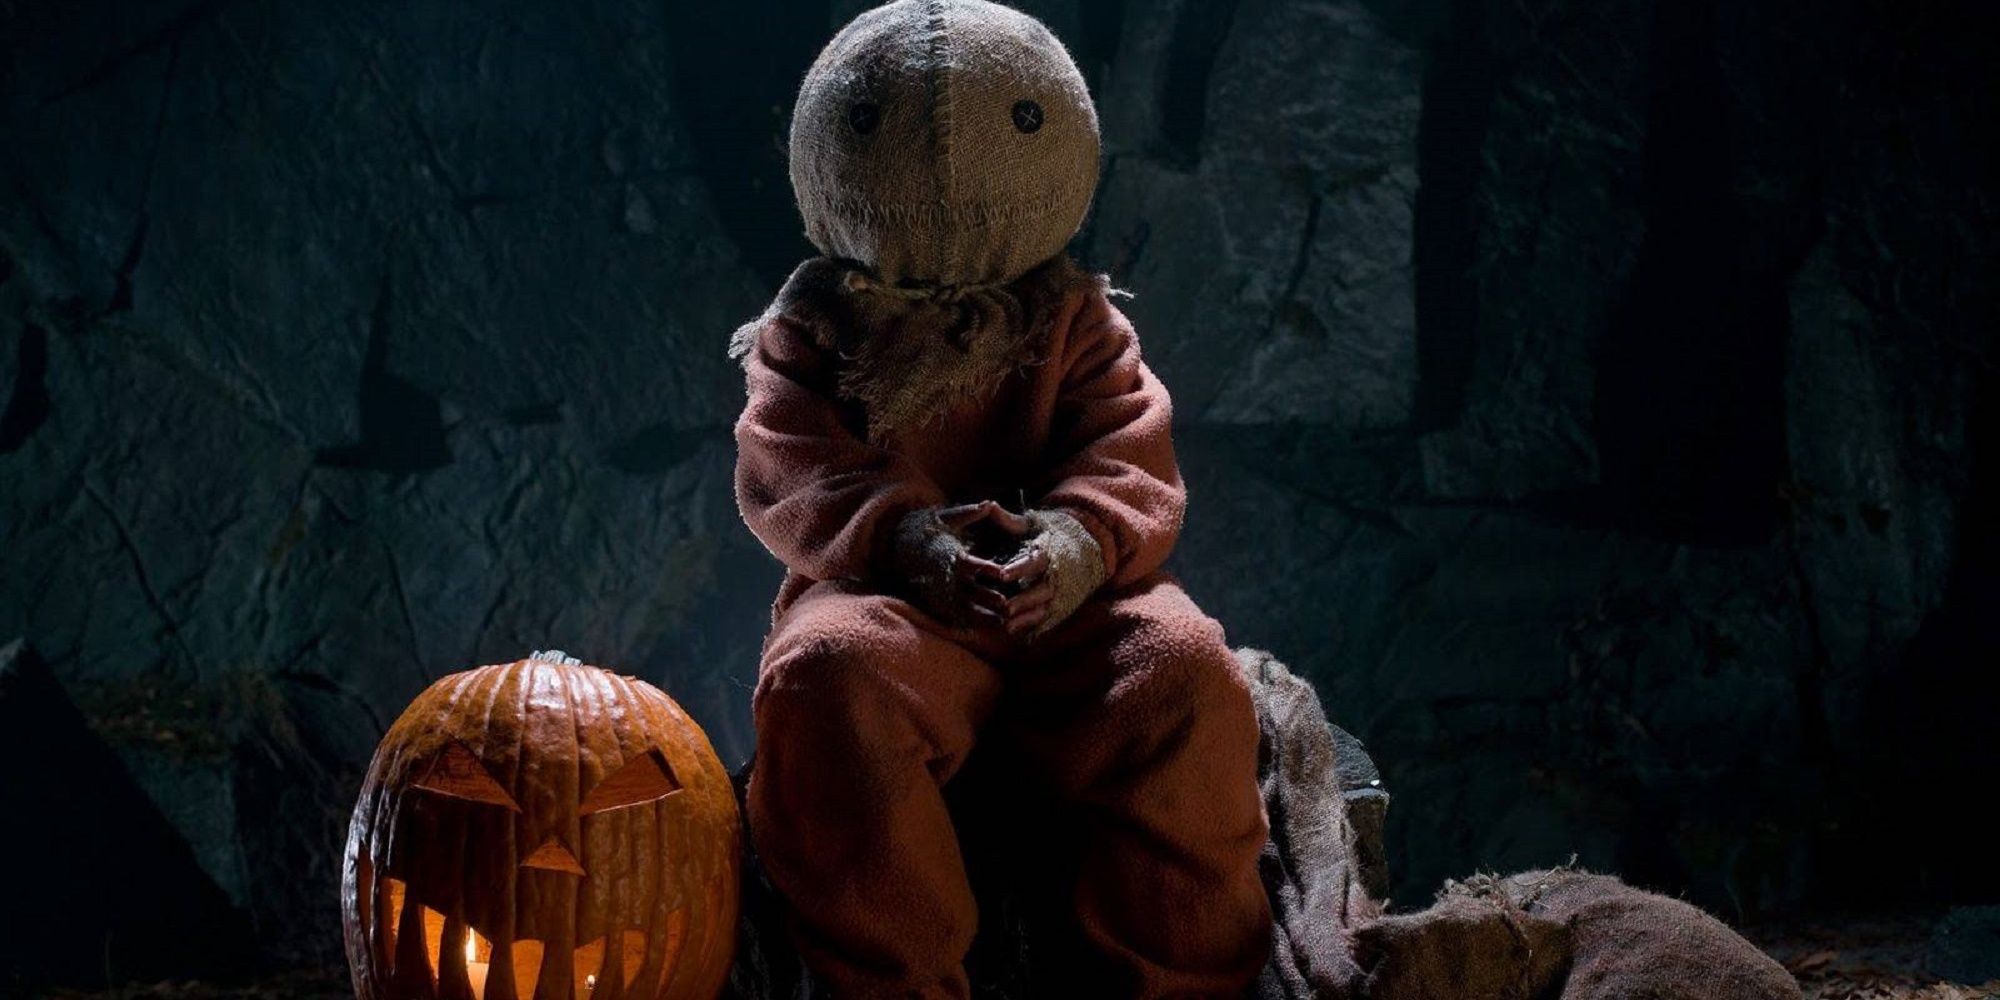 Atlético diamante Correo aéreo Sam From Trick 'r Treat Is the Most Iconic Horror Icon of the 21st Century